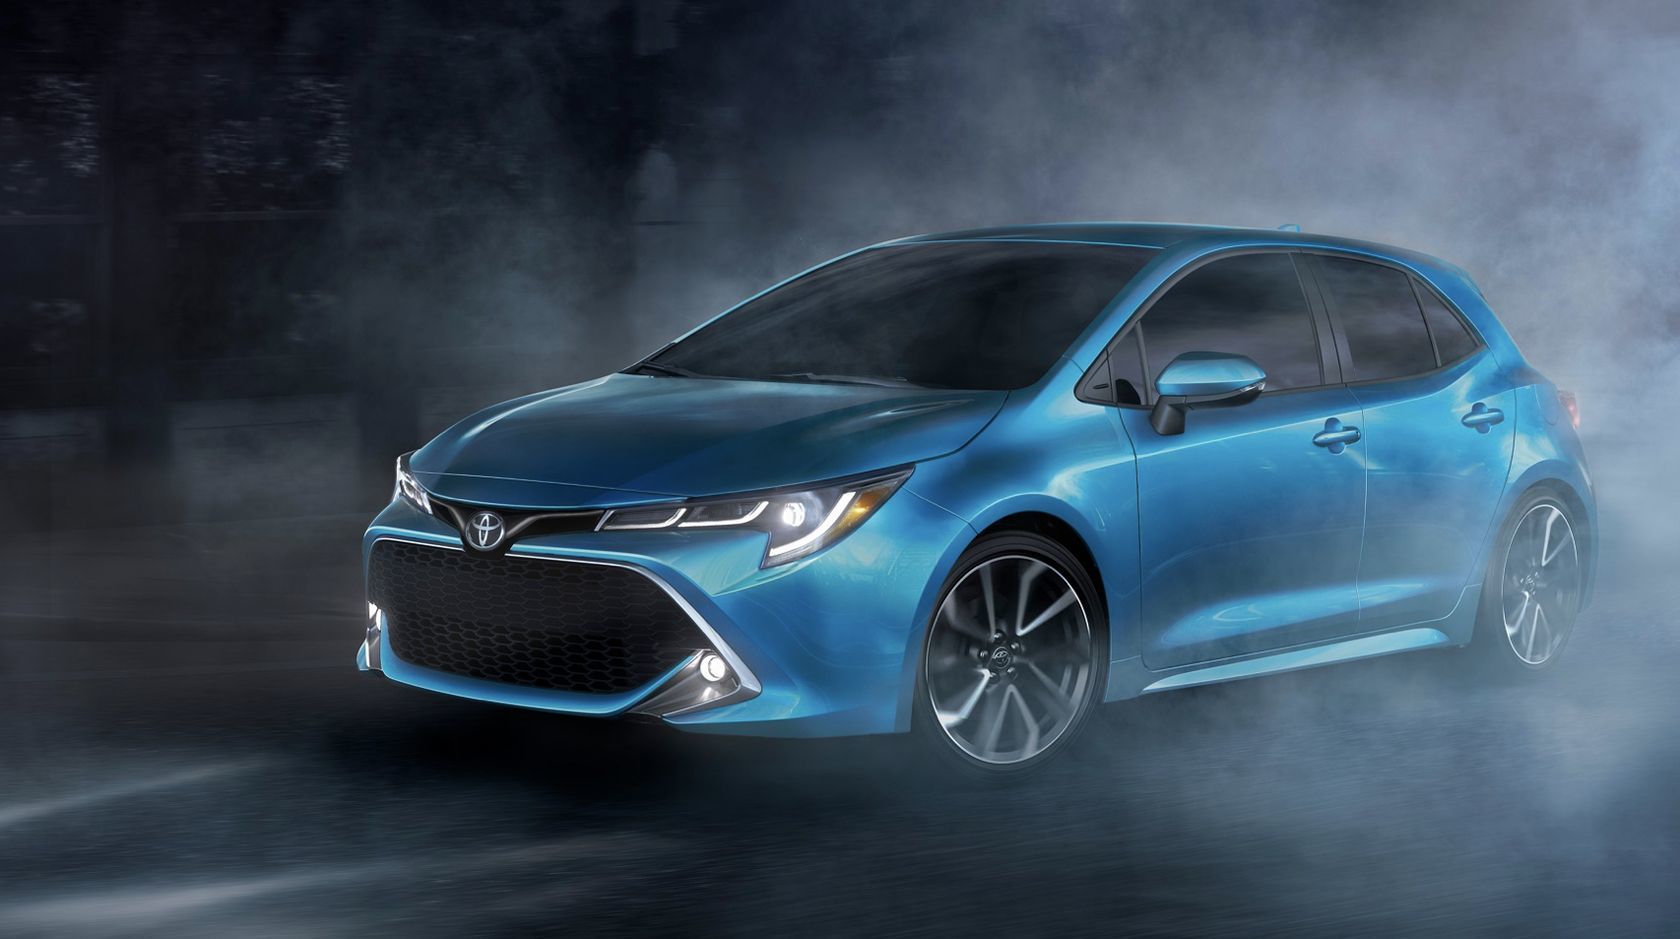 The new 2019 Toyota Corolla Hatchback soon available at Longueuil Toyota